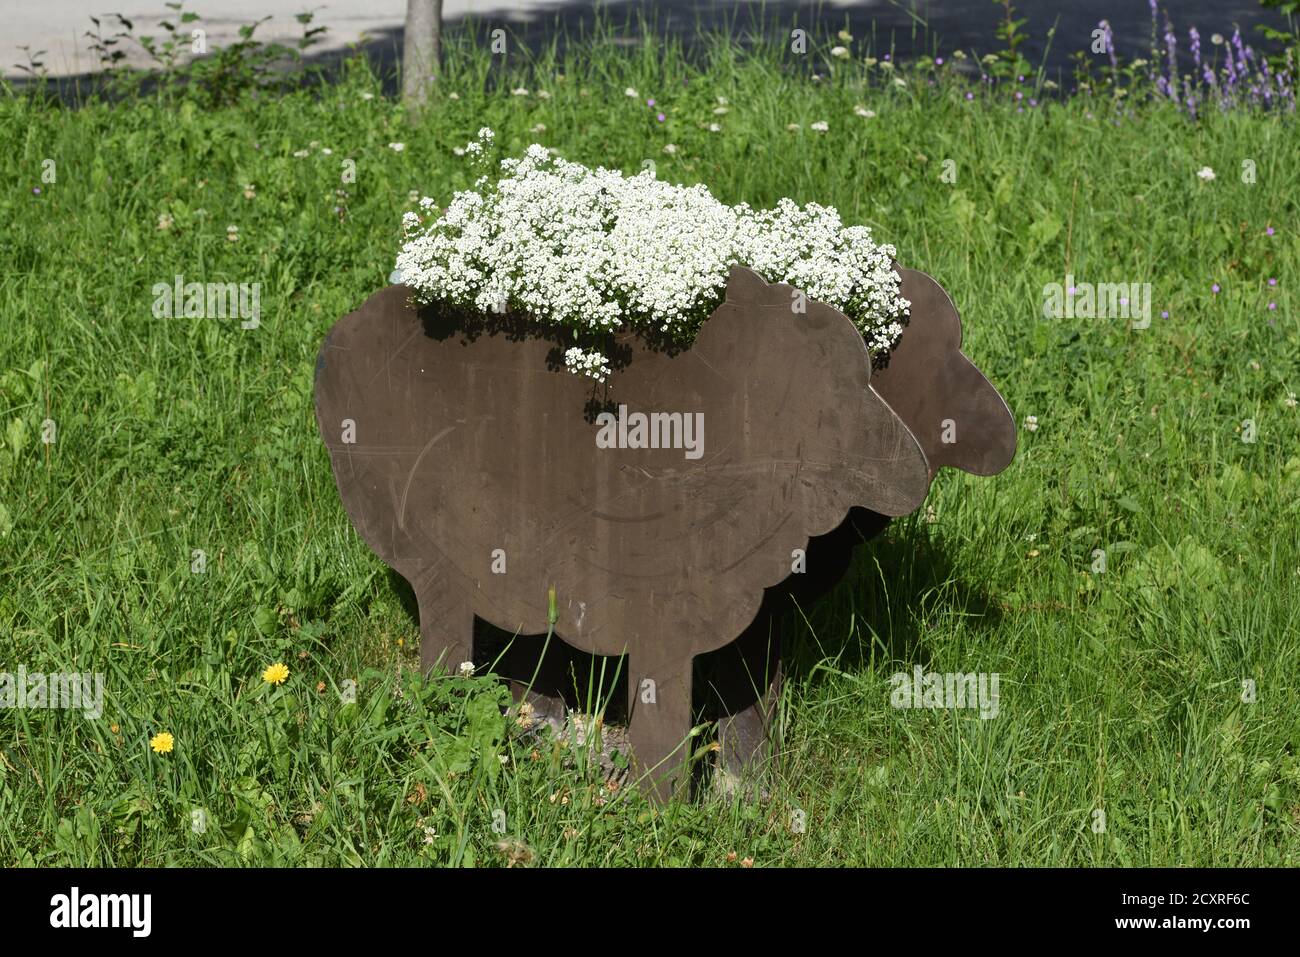 Sheep-Shaped Metal Planter with White Flowers Representing Fleece or  Sheep's Wool Stock Photo - Alamy